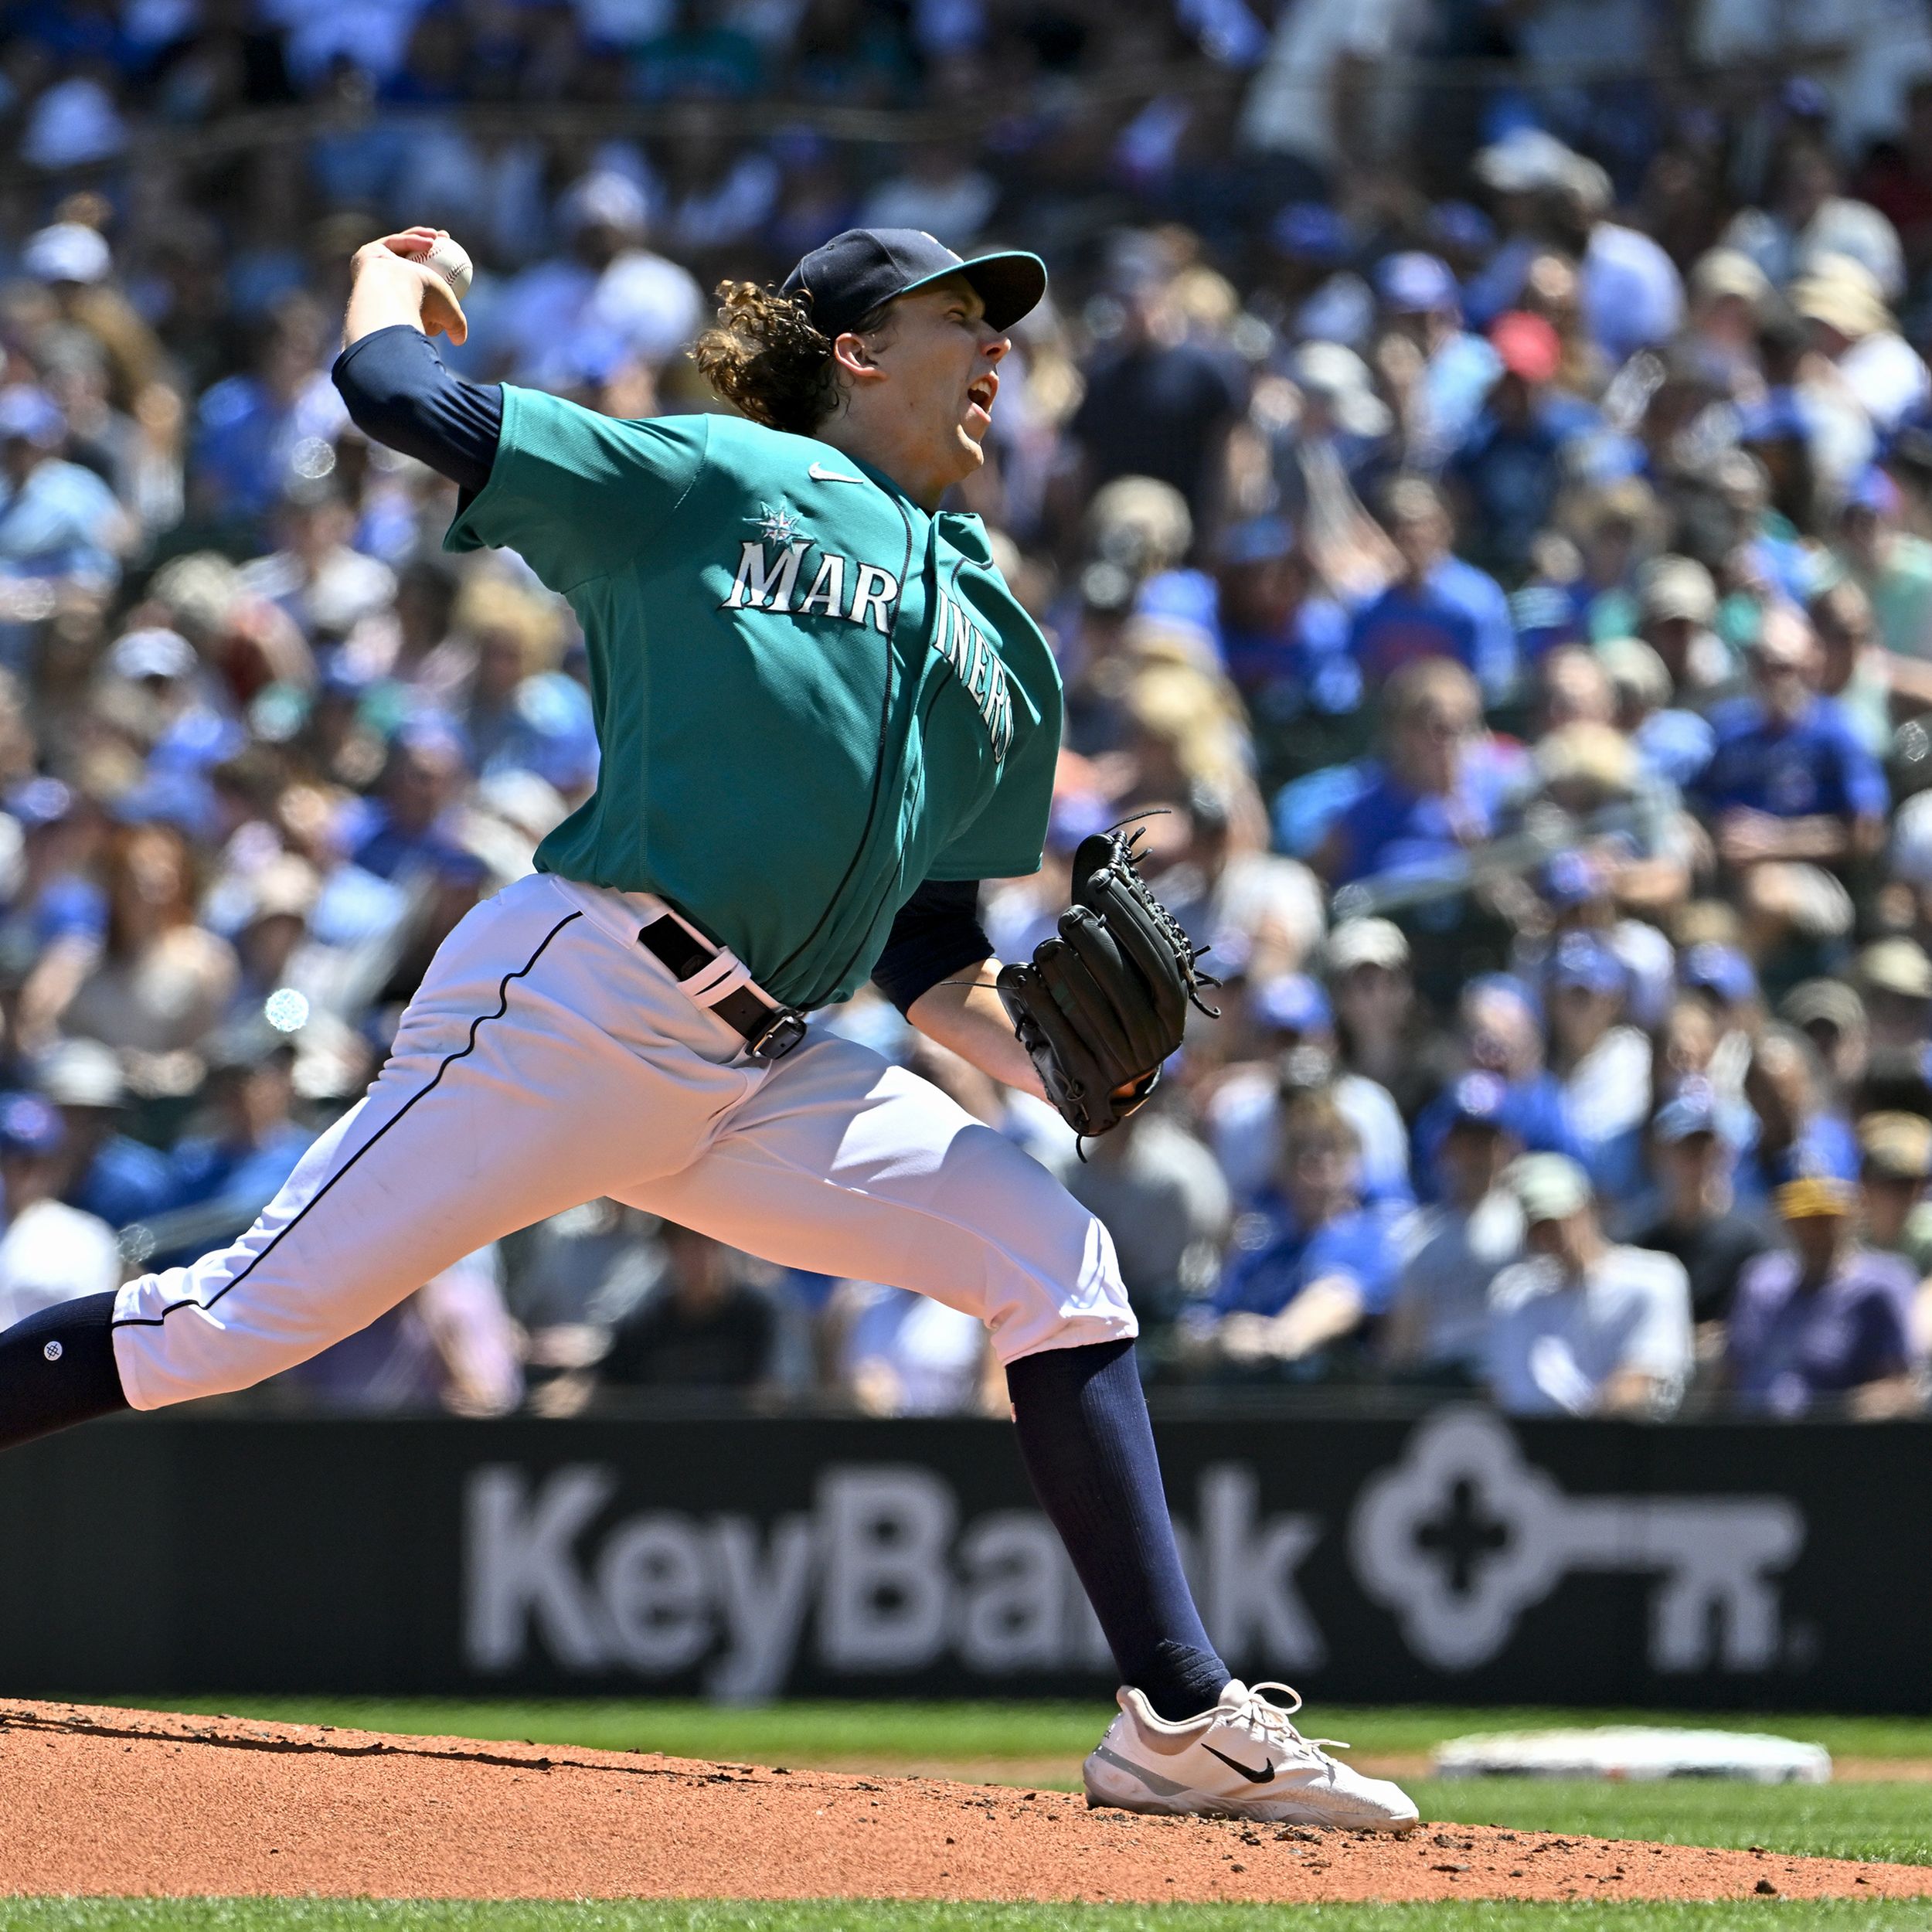 Campbell earns first win as Mariners hold off Jays